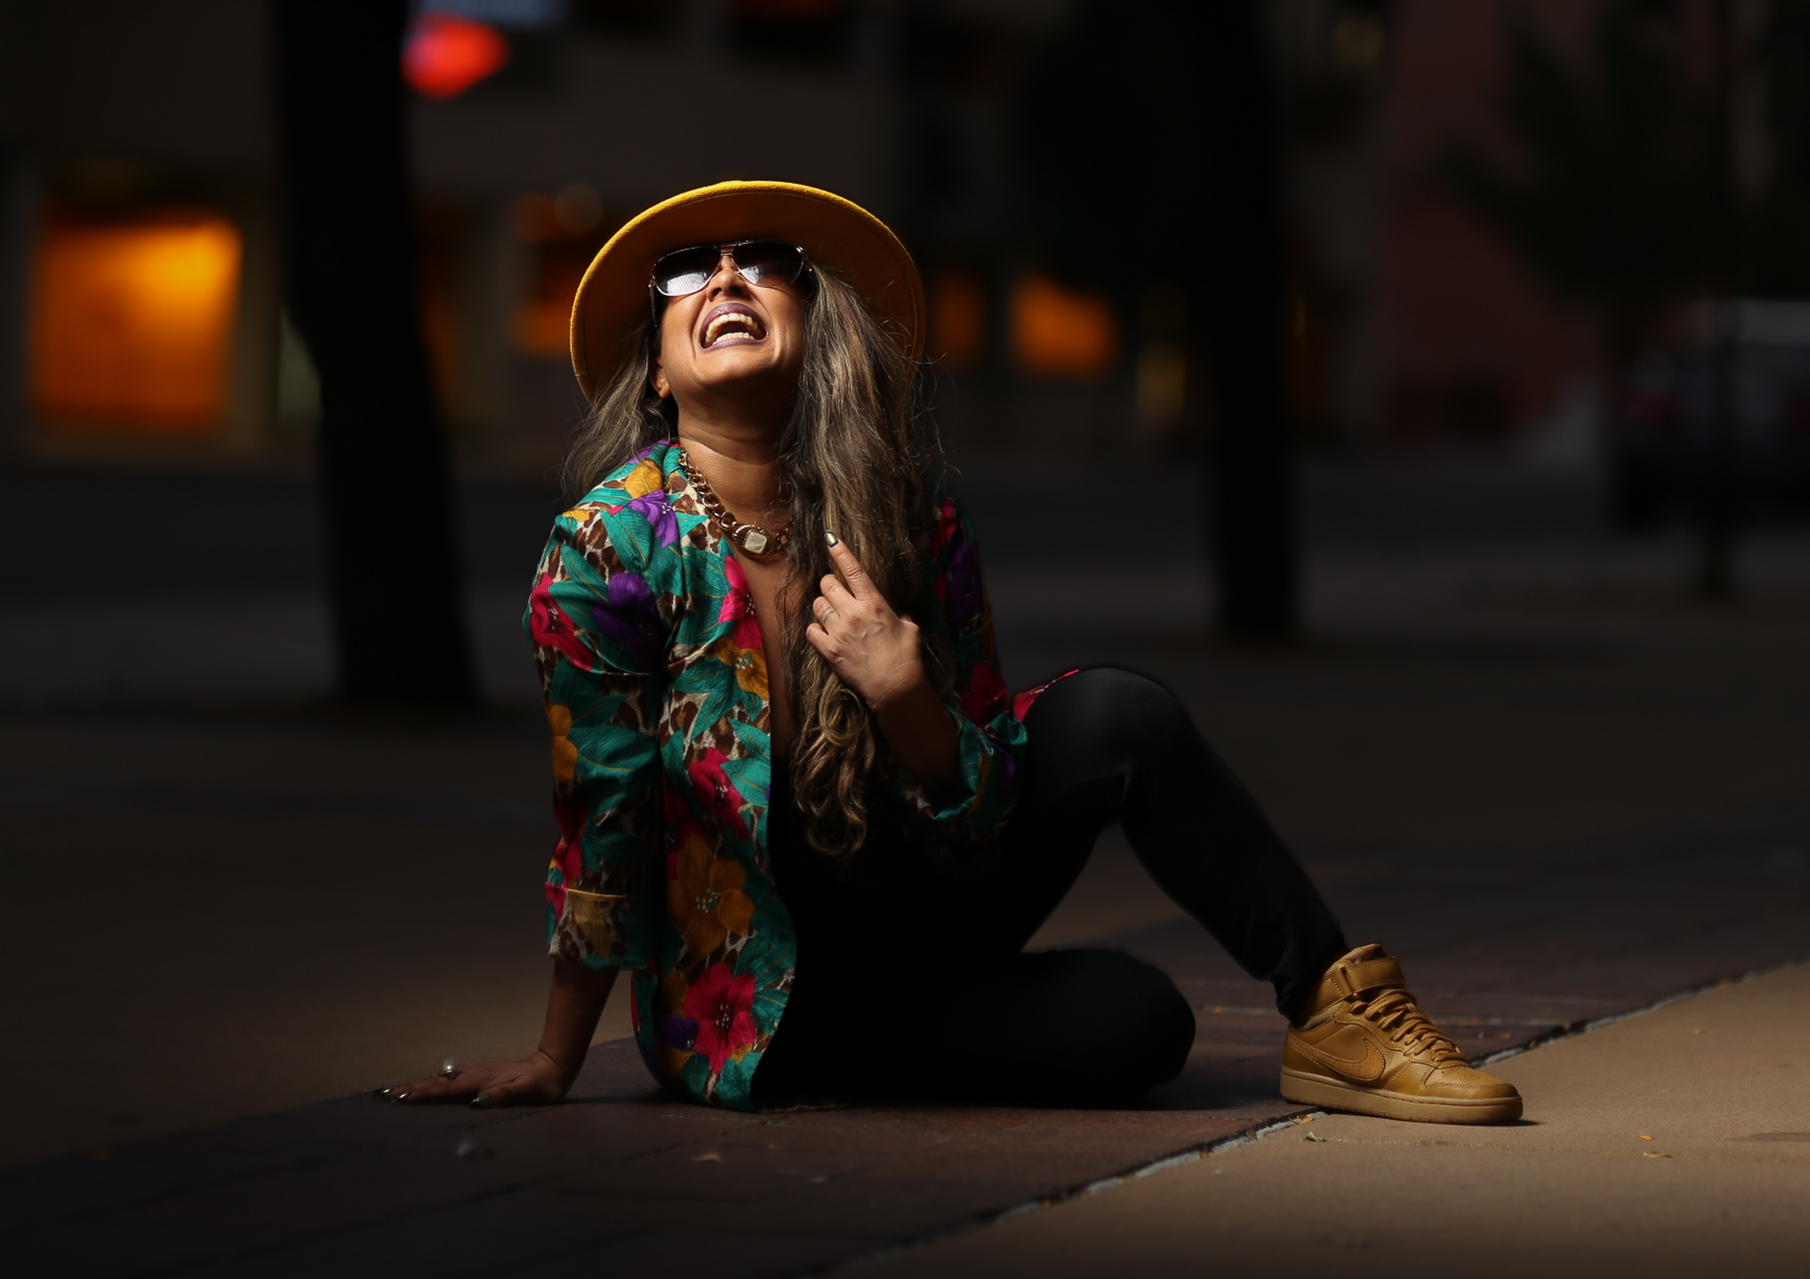 A person with long hair wearing a hat and sunglasses poses on the floor